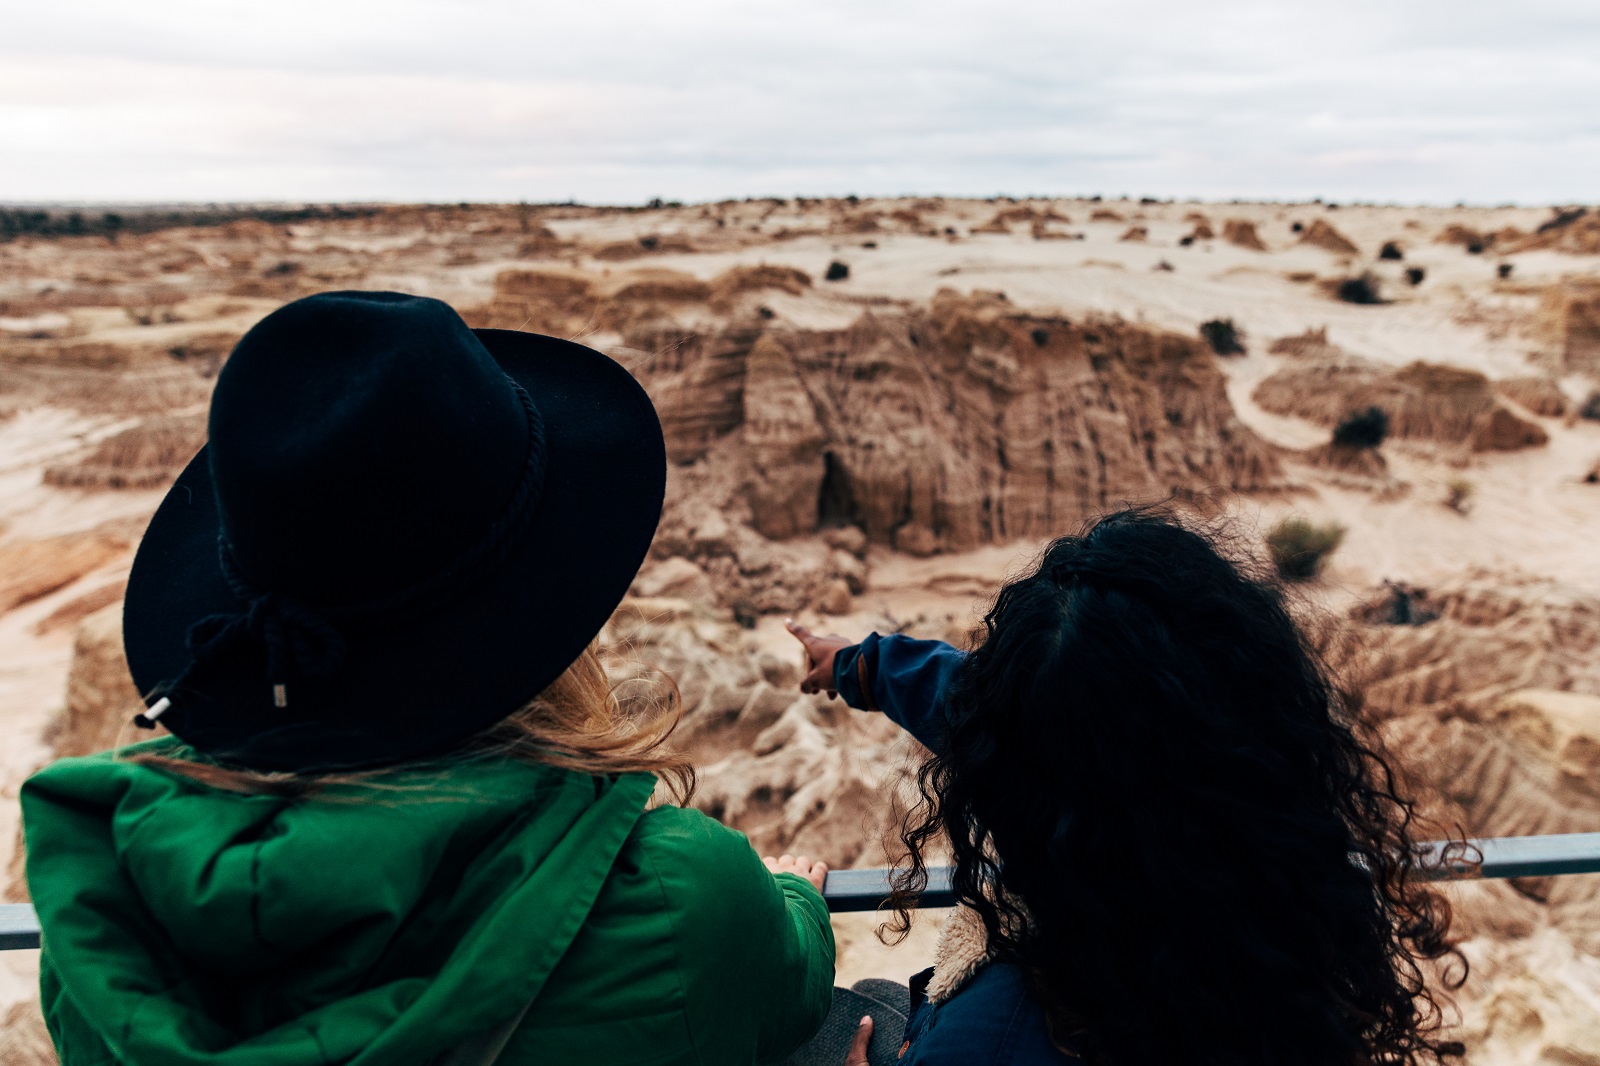 Looking at lunettes which are thick layers of sand and clay at Red Top lookout in Mungo National Park. Photo: Melissa Findley/DPIE